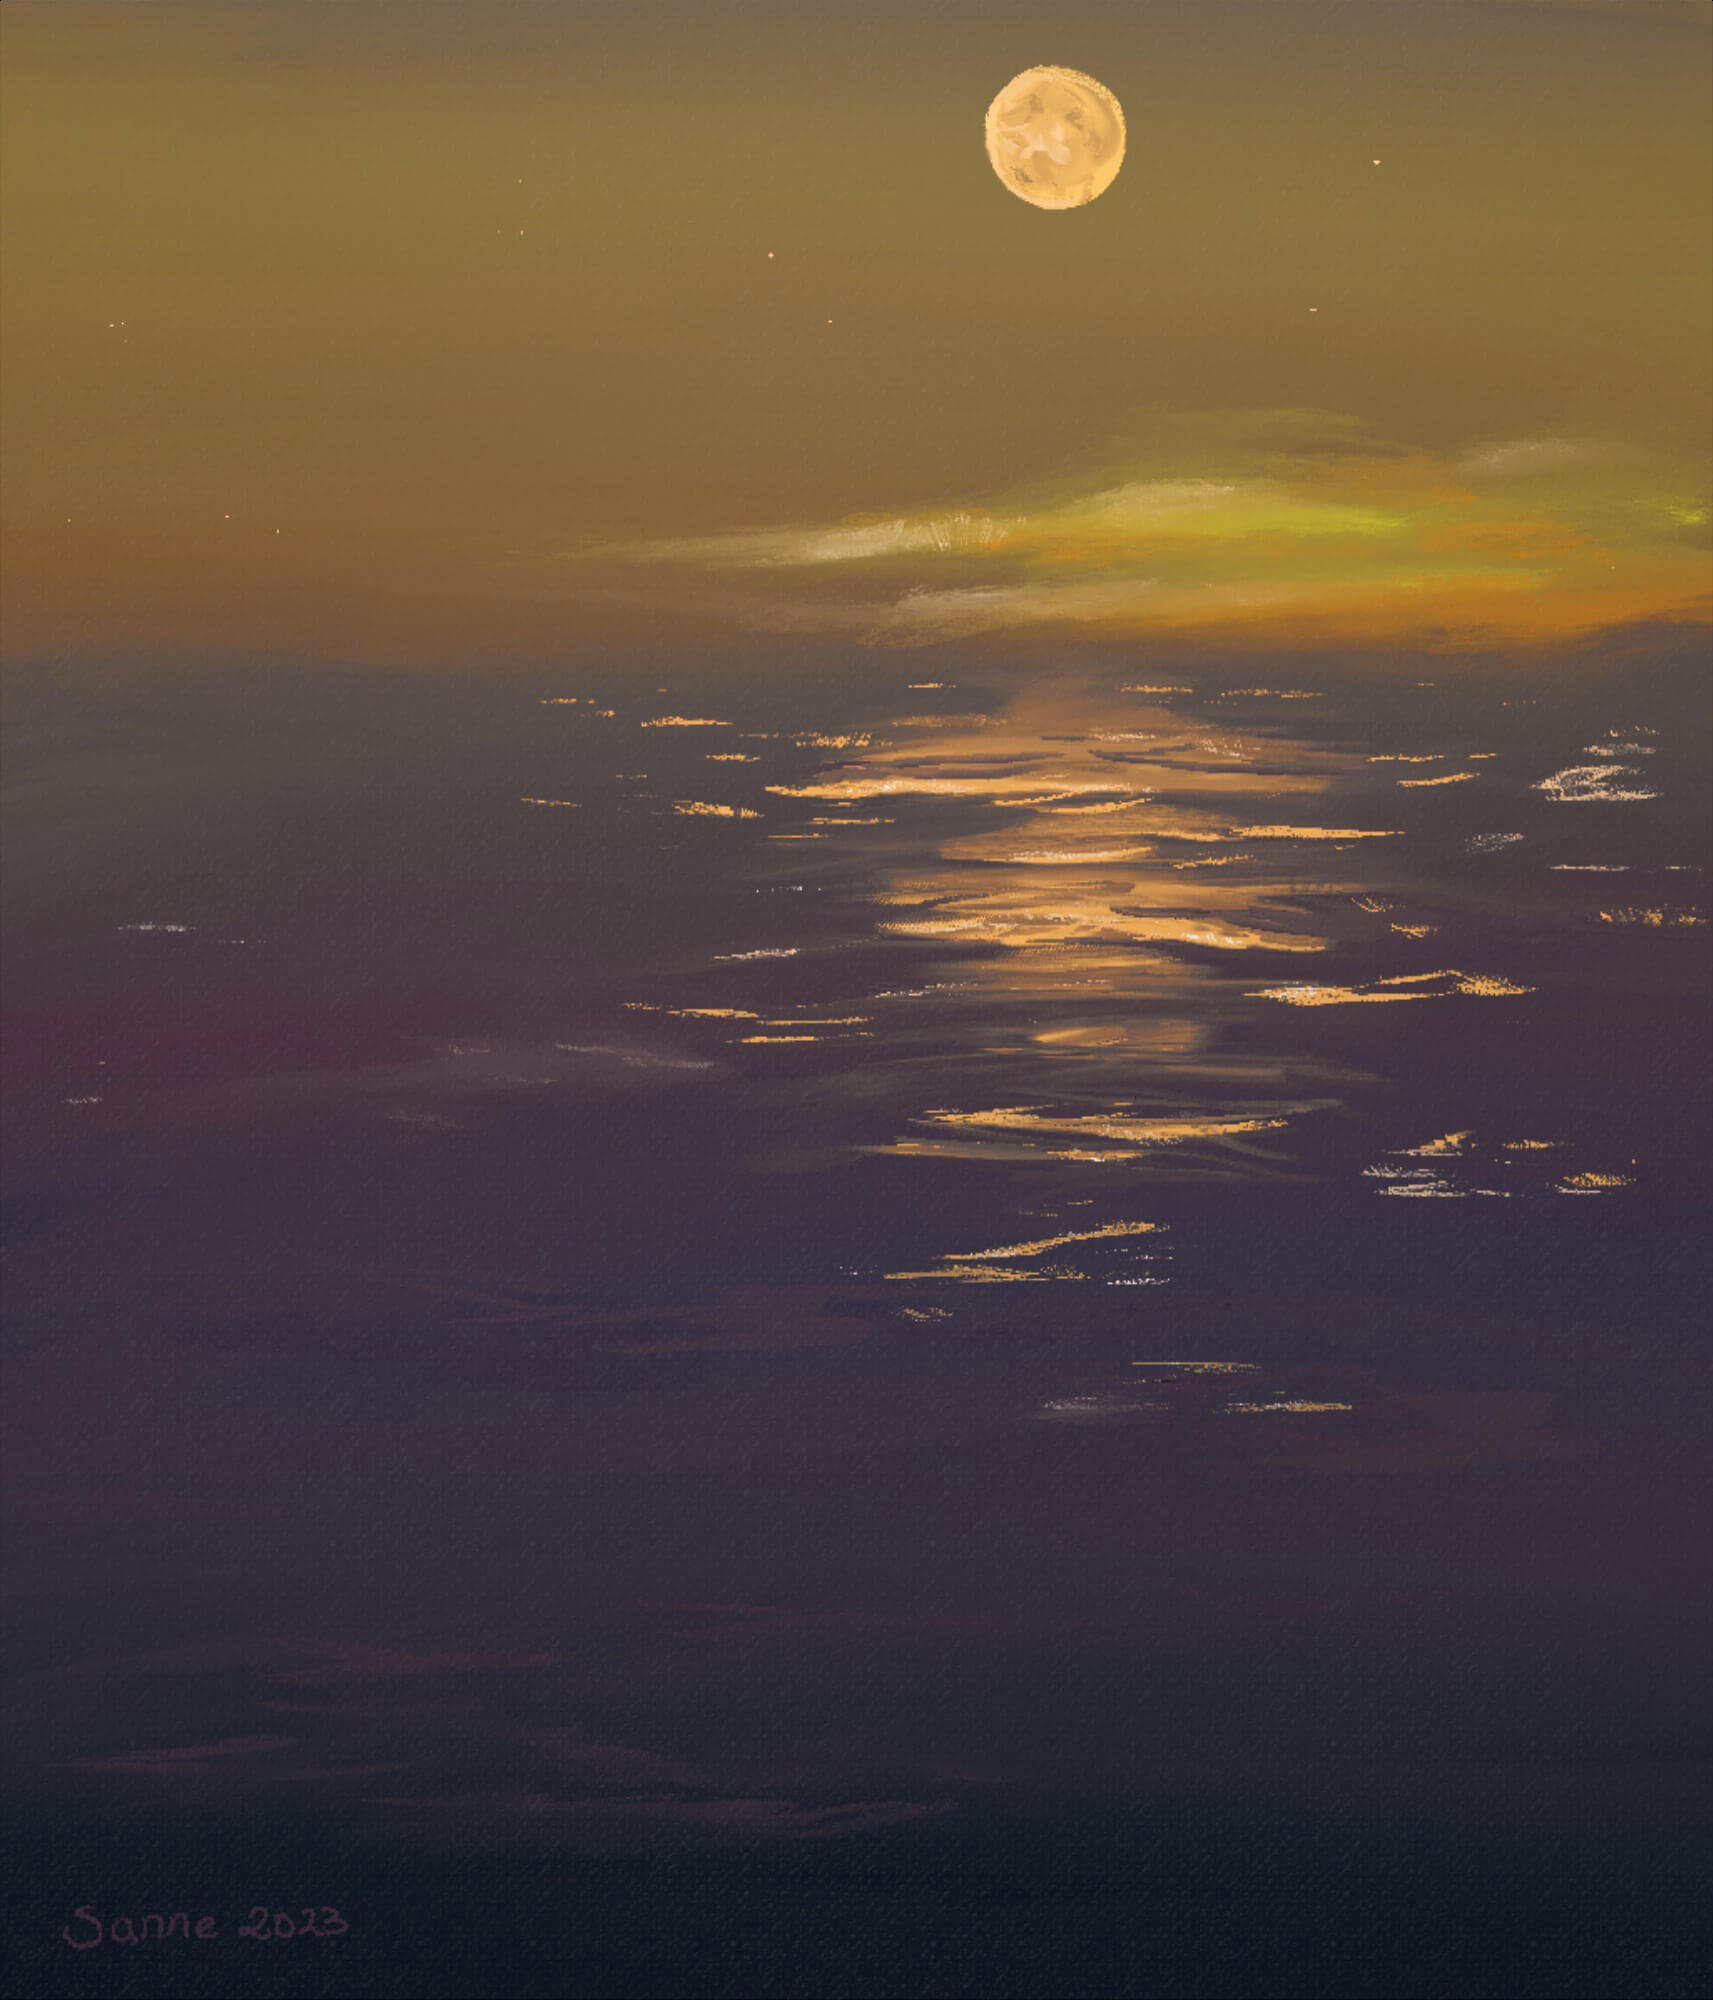 A moody VR oil painting featuring a dusky ocean. The sky is an almost unsettling color of desaturated orange and yellow with whisps of clouds in the distance. A pale yellow moon hangs in the sky with a few stars dotted here and there. The ocean is a desaturated color of purple and blues, with bright shimmery yellow reflections from the moon. I'm alone again.